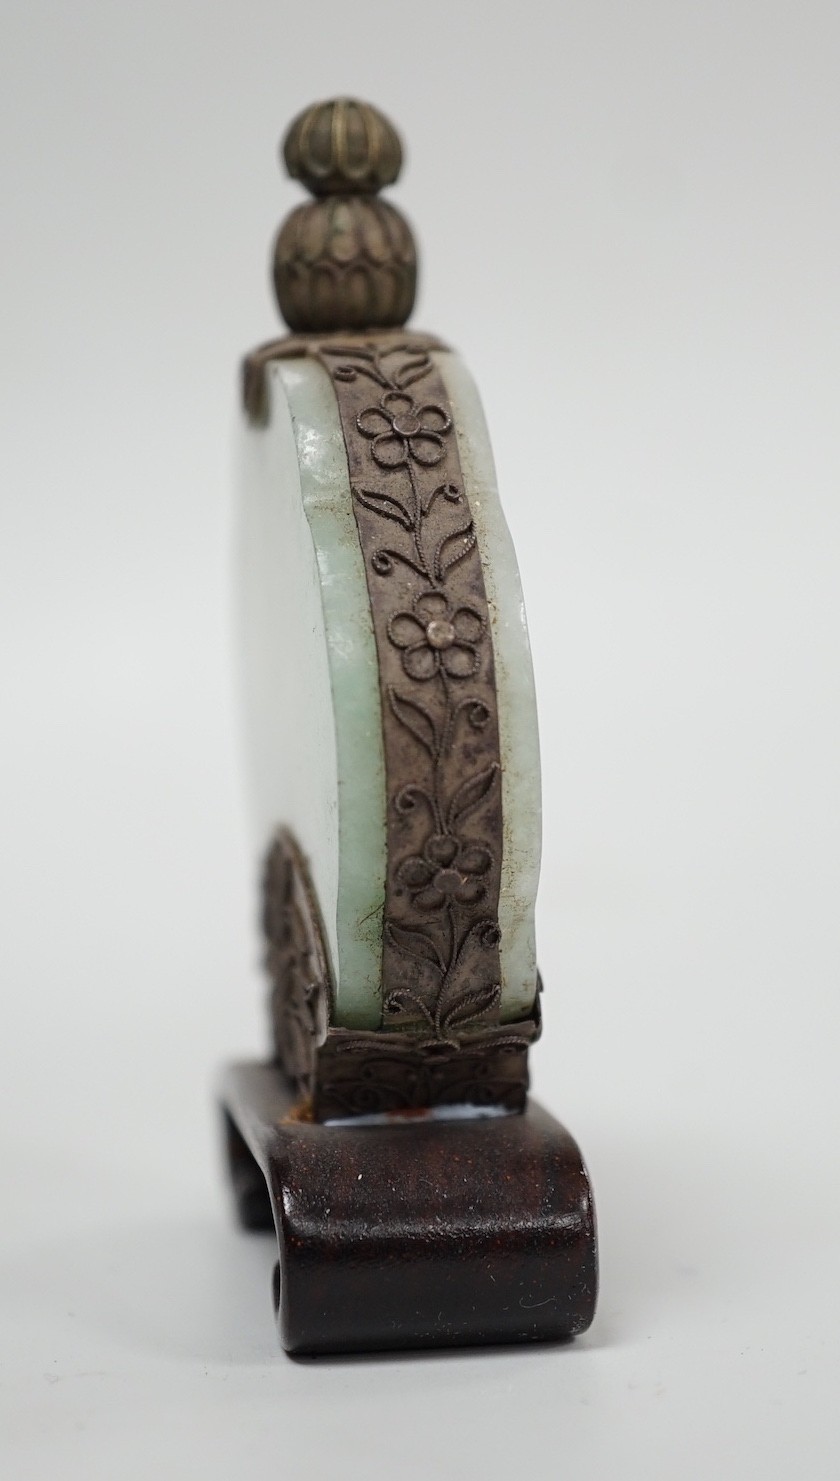 A Chinese jadeite and silver filigree mounted snuff bottle, 20th century